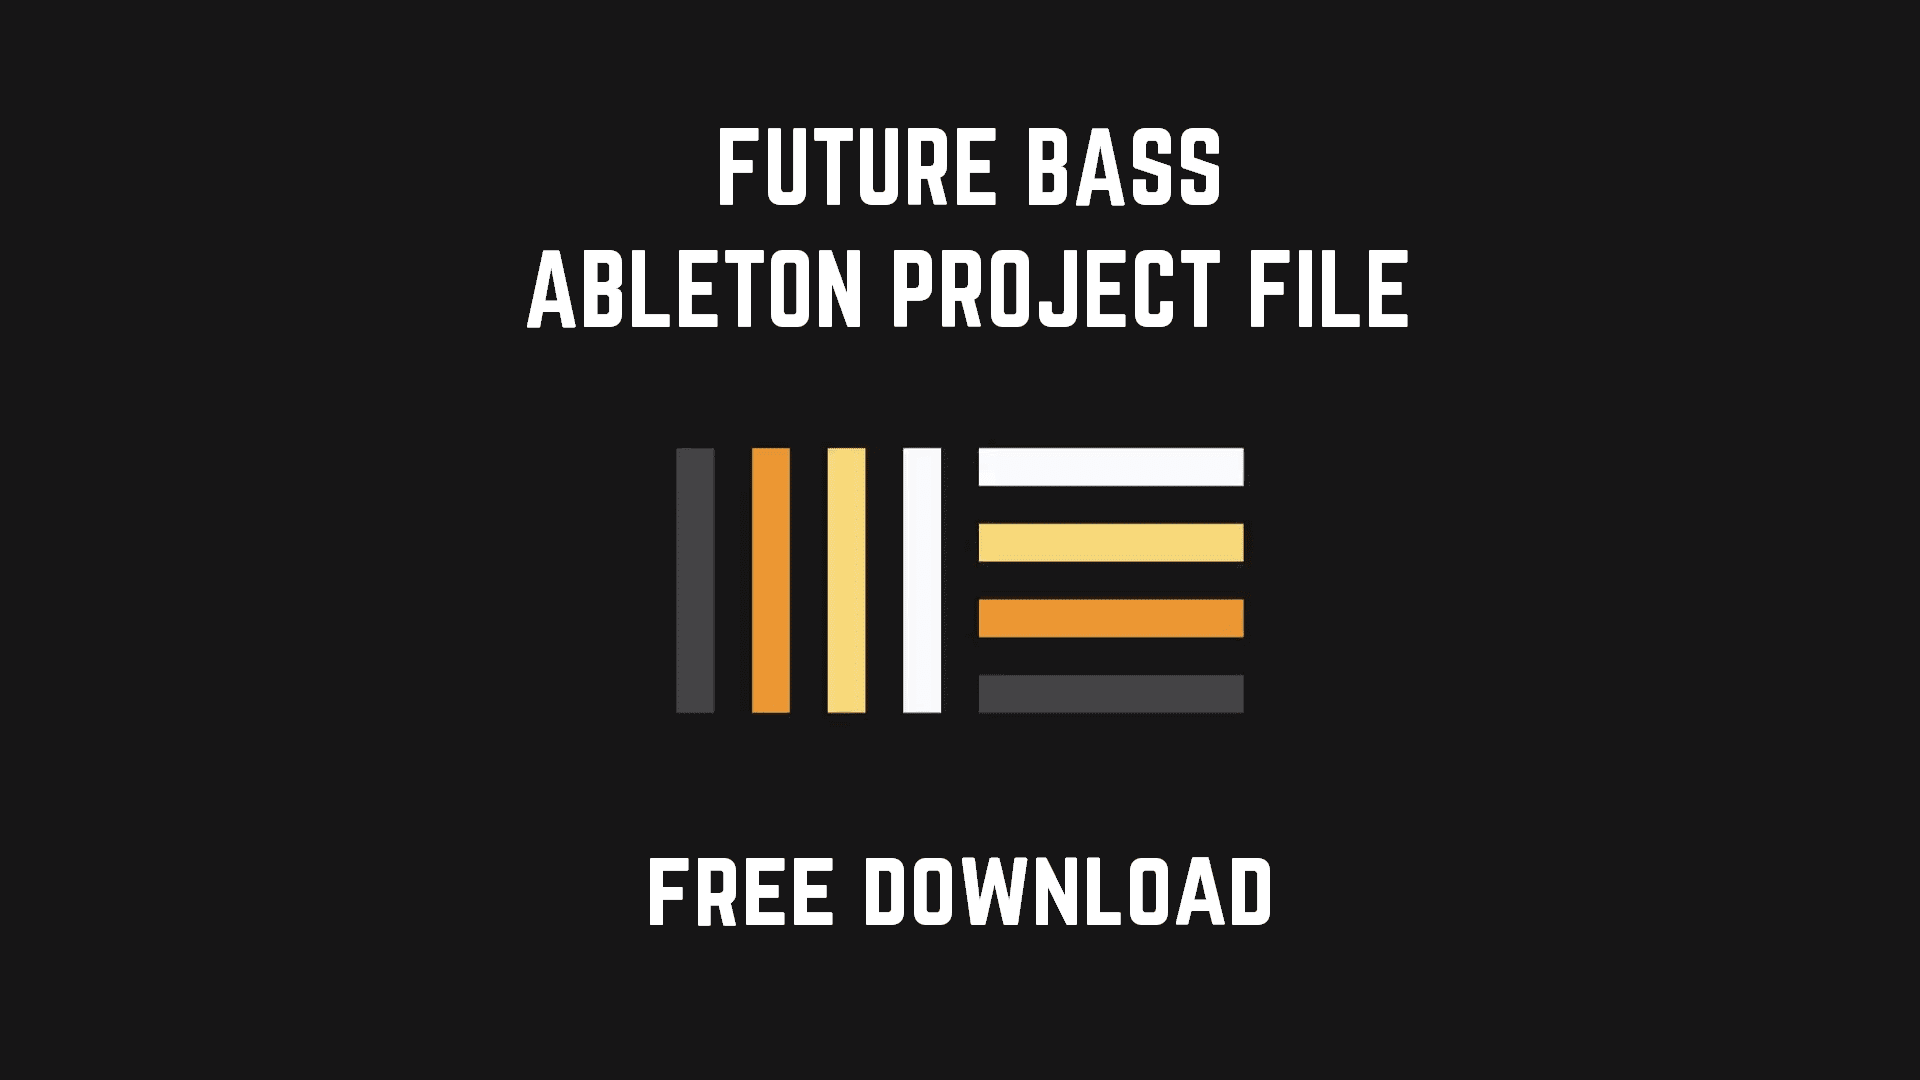 FBFS S01 - Free Future Bass Project File for Ableton Live 10 - Oversampled